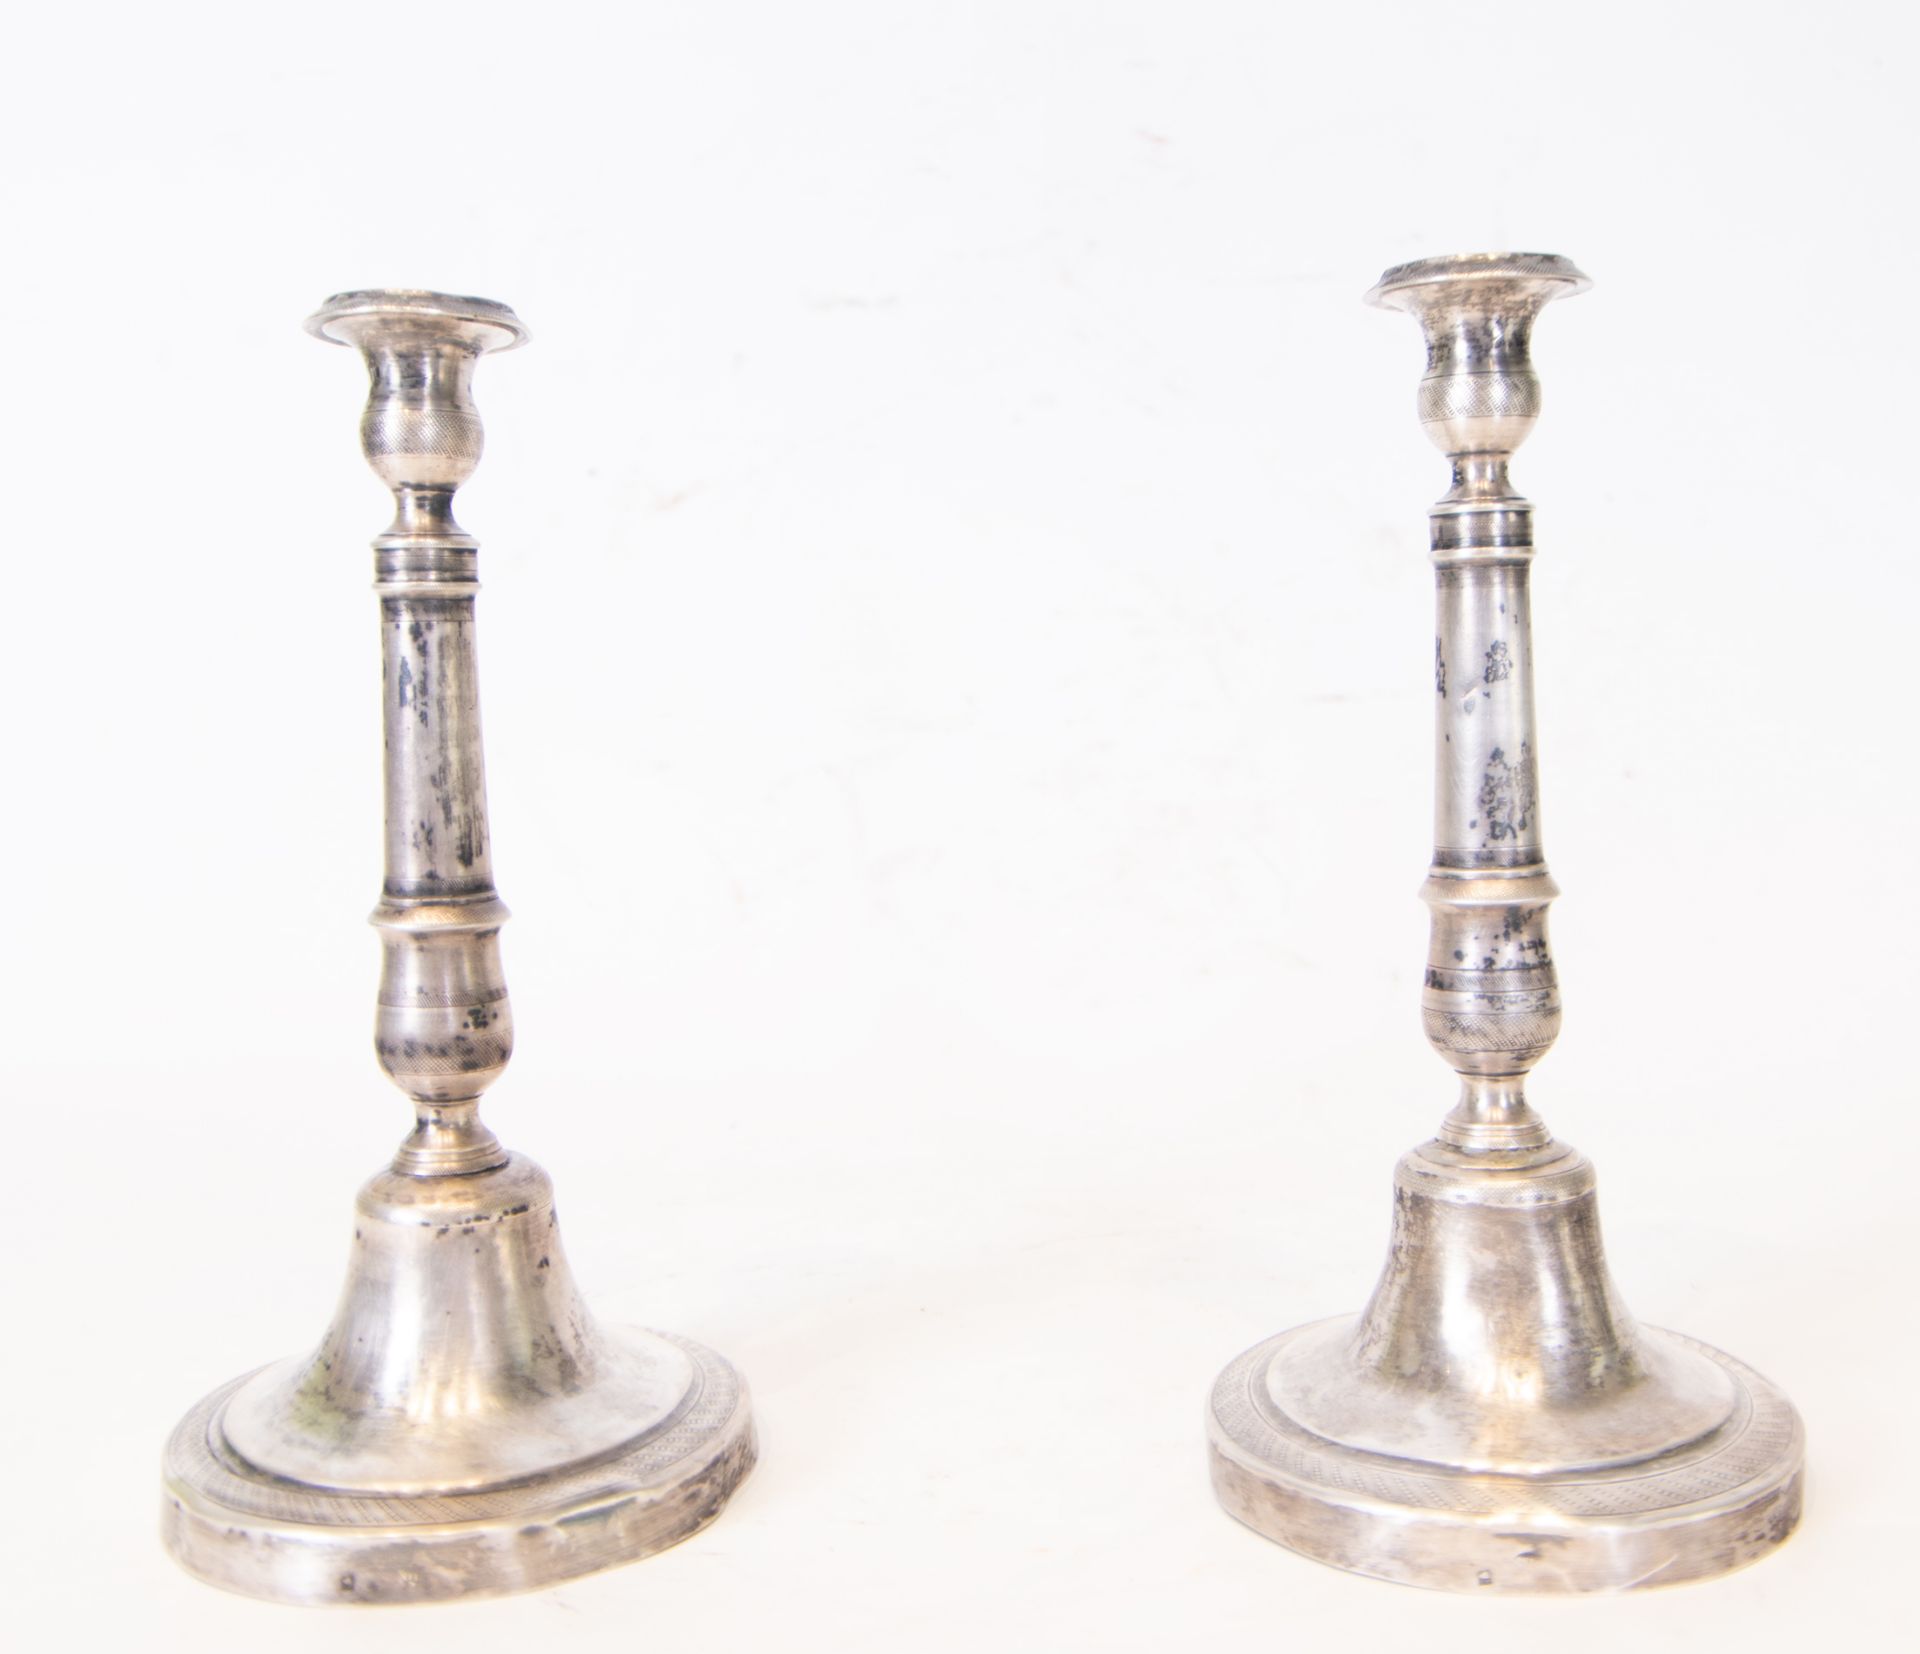 Pair of rare Fernandino candlesticks in solid silver, Spanish school of the 18th - 19th century